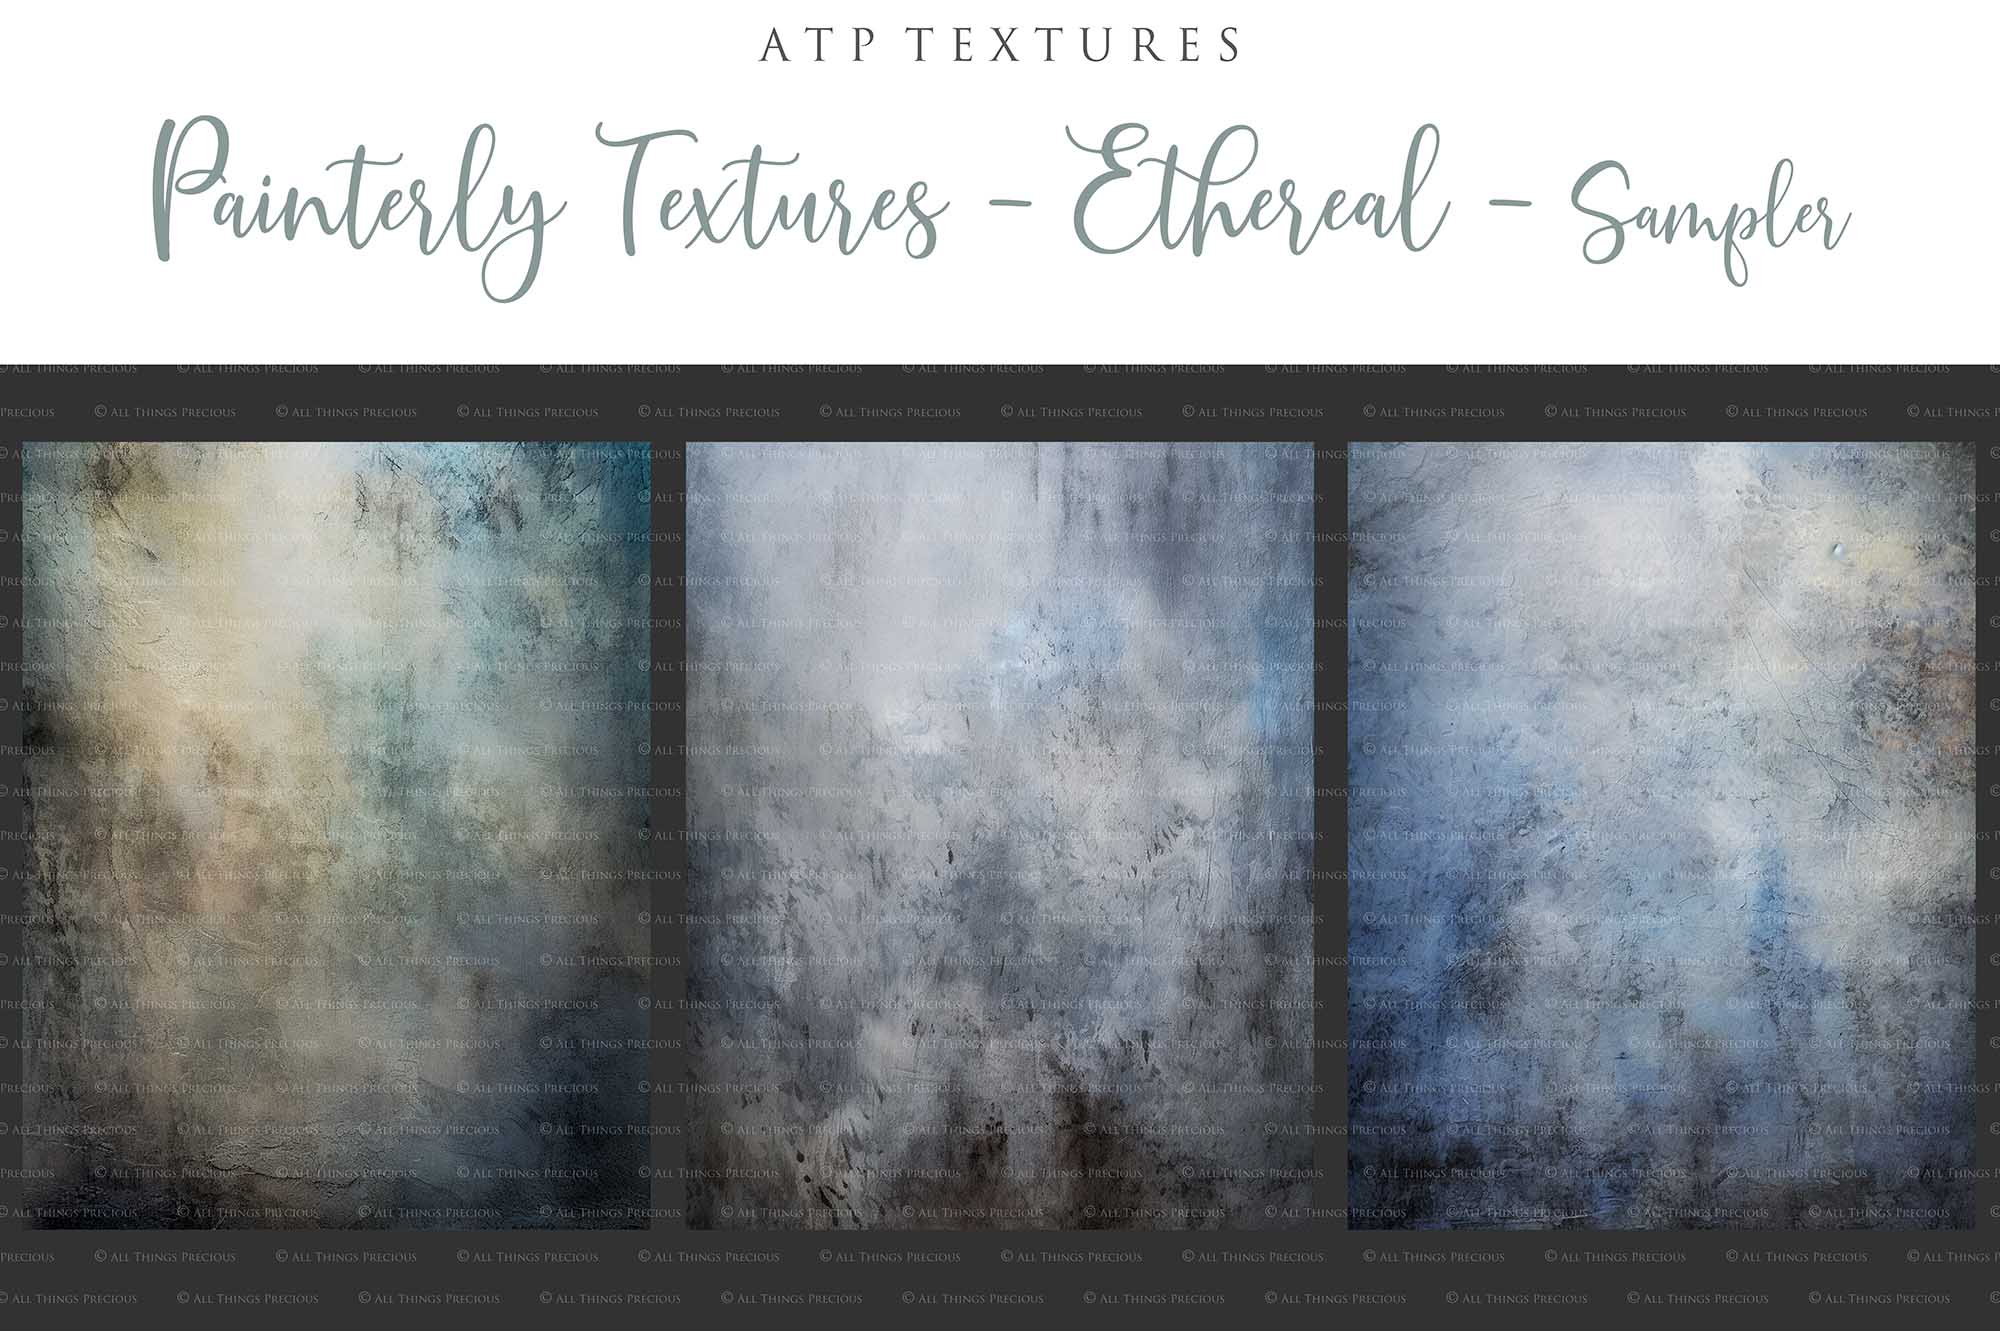 15 Painterly Textures / Digital Backgrounds - ETHEREAL - Set 3